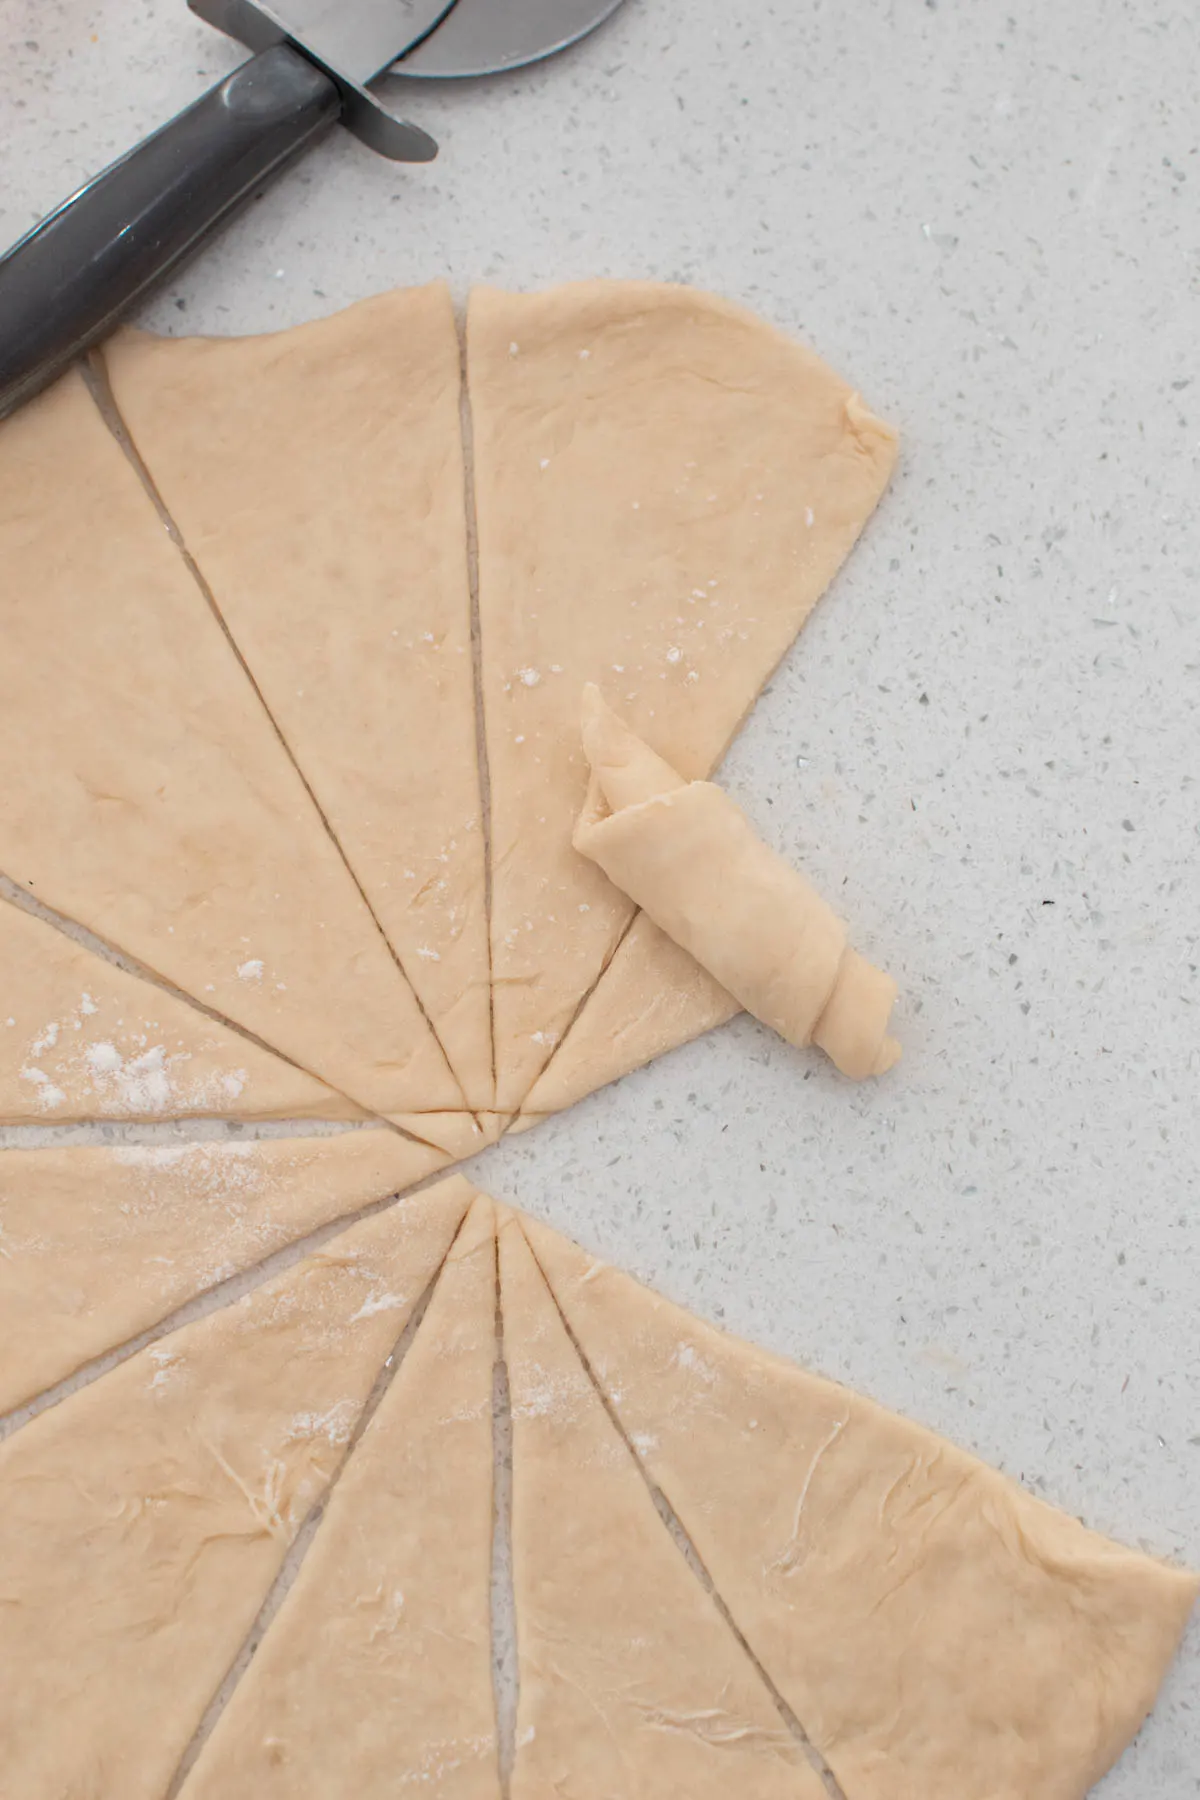 Partially rolled up crescent roll dough next to other triangles of dough.